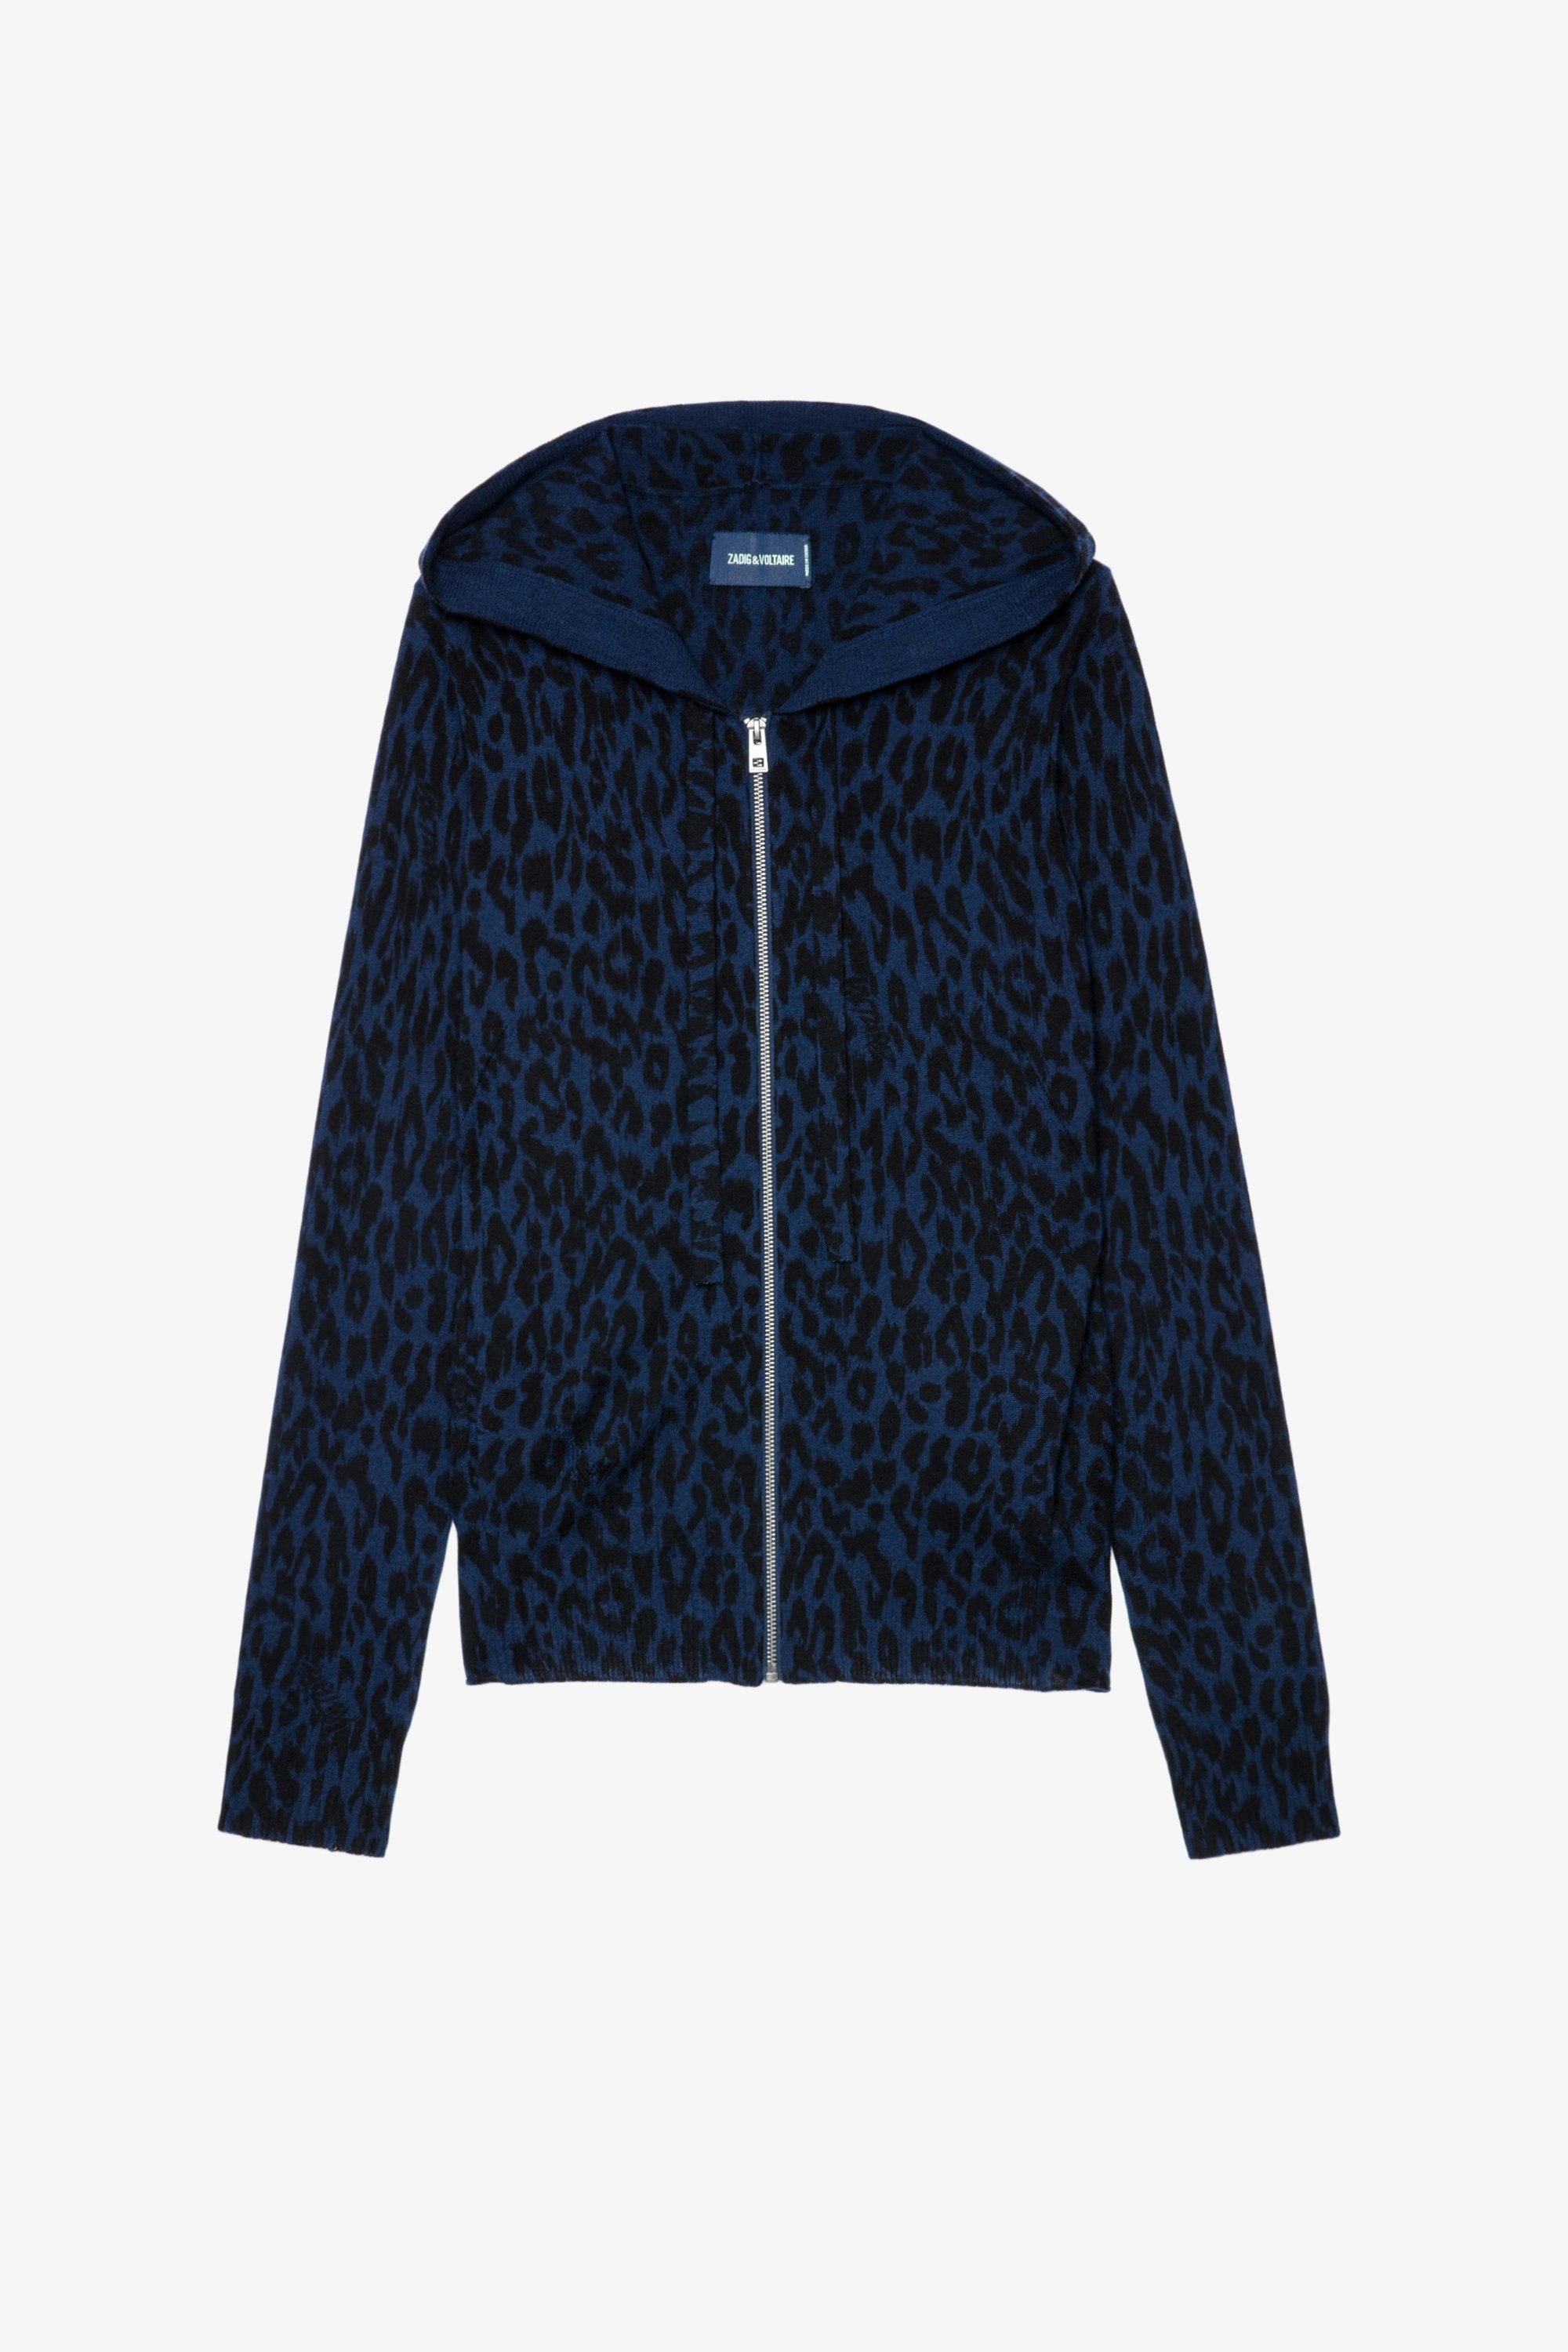 Cassy Cashmere Leopard Cardigan undefined